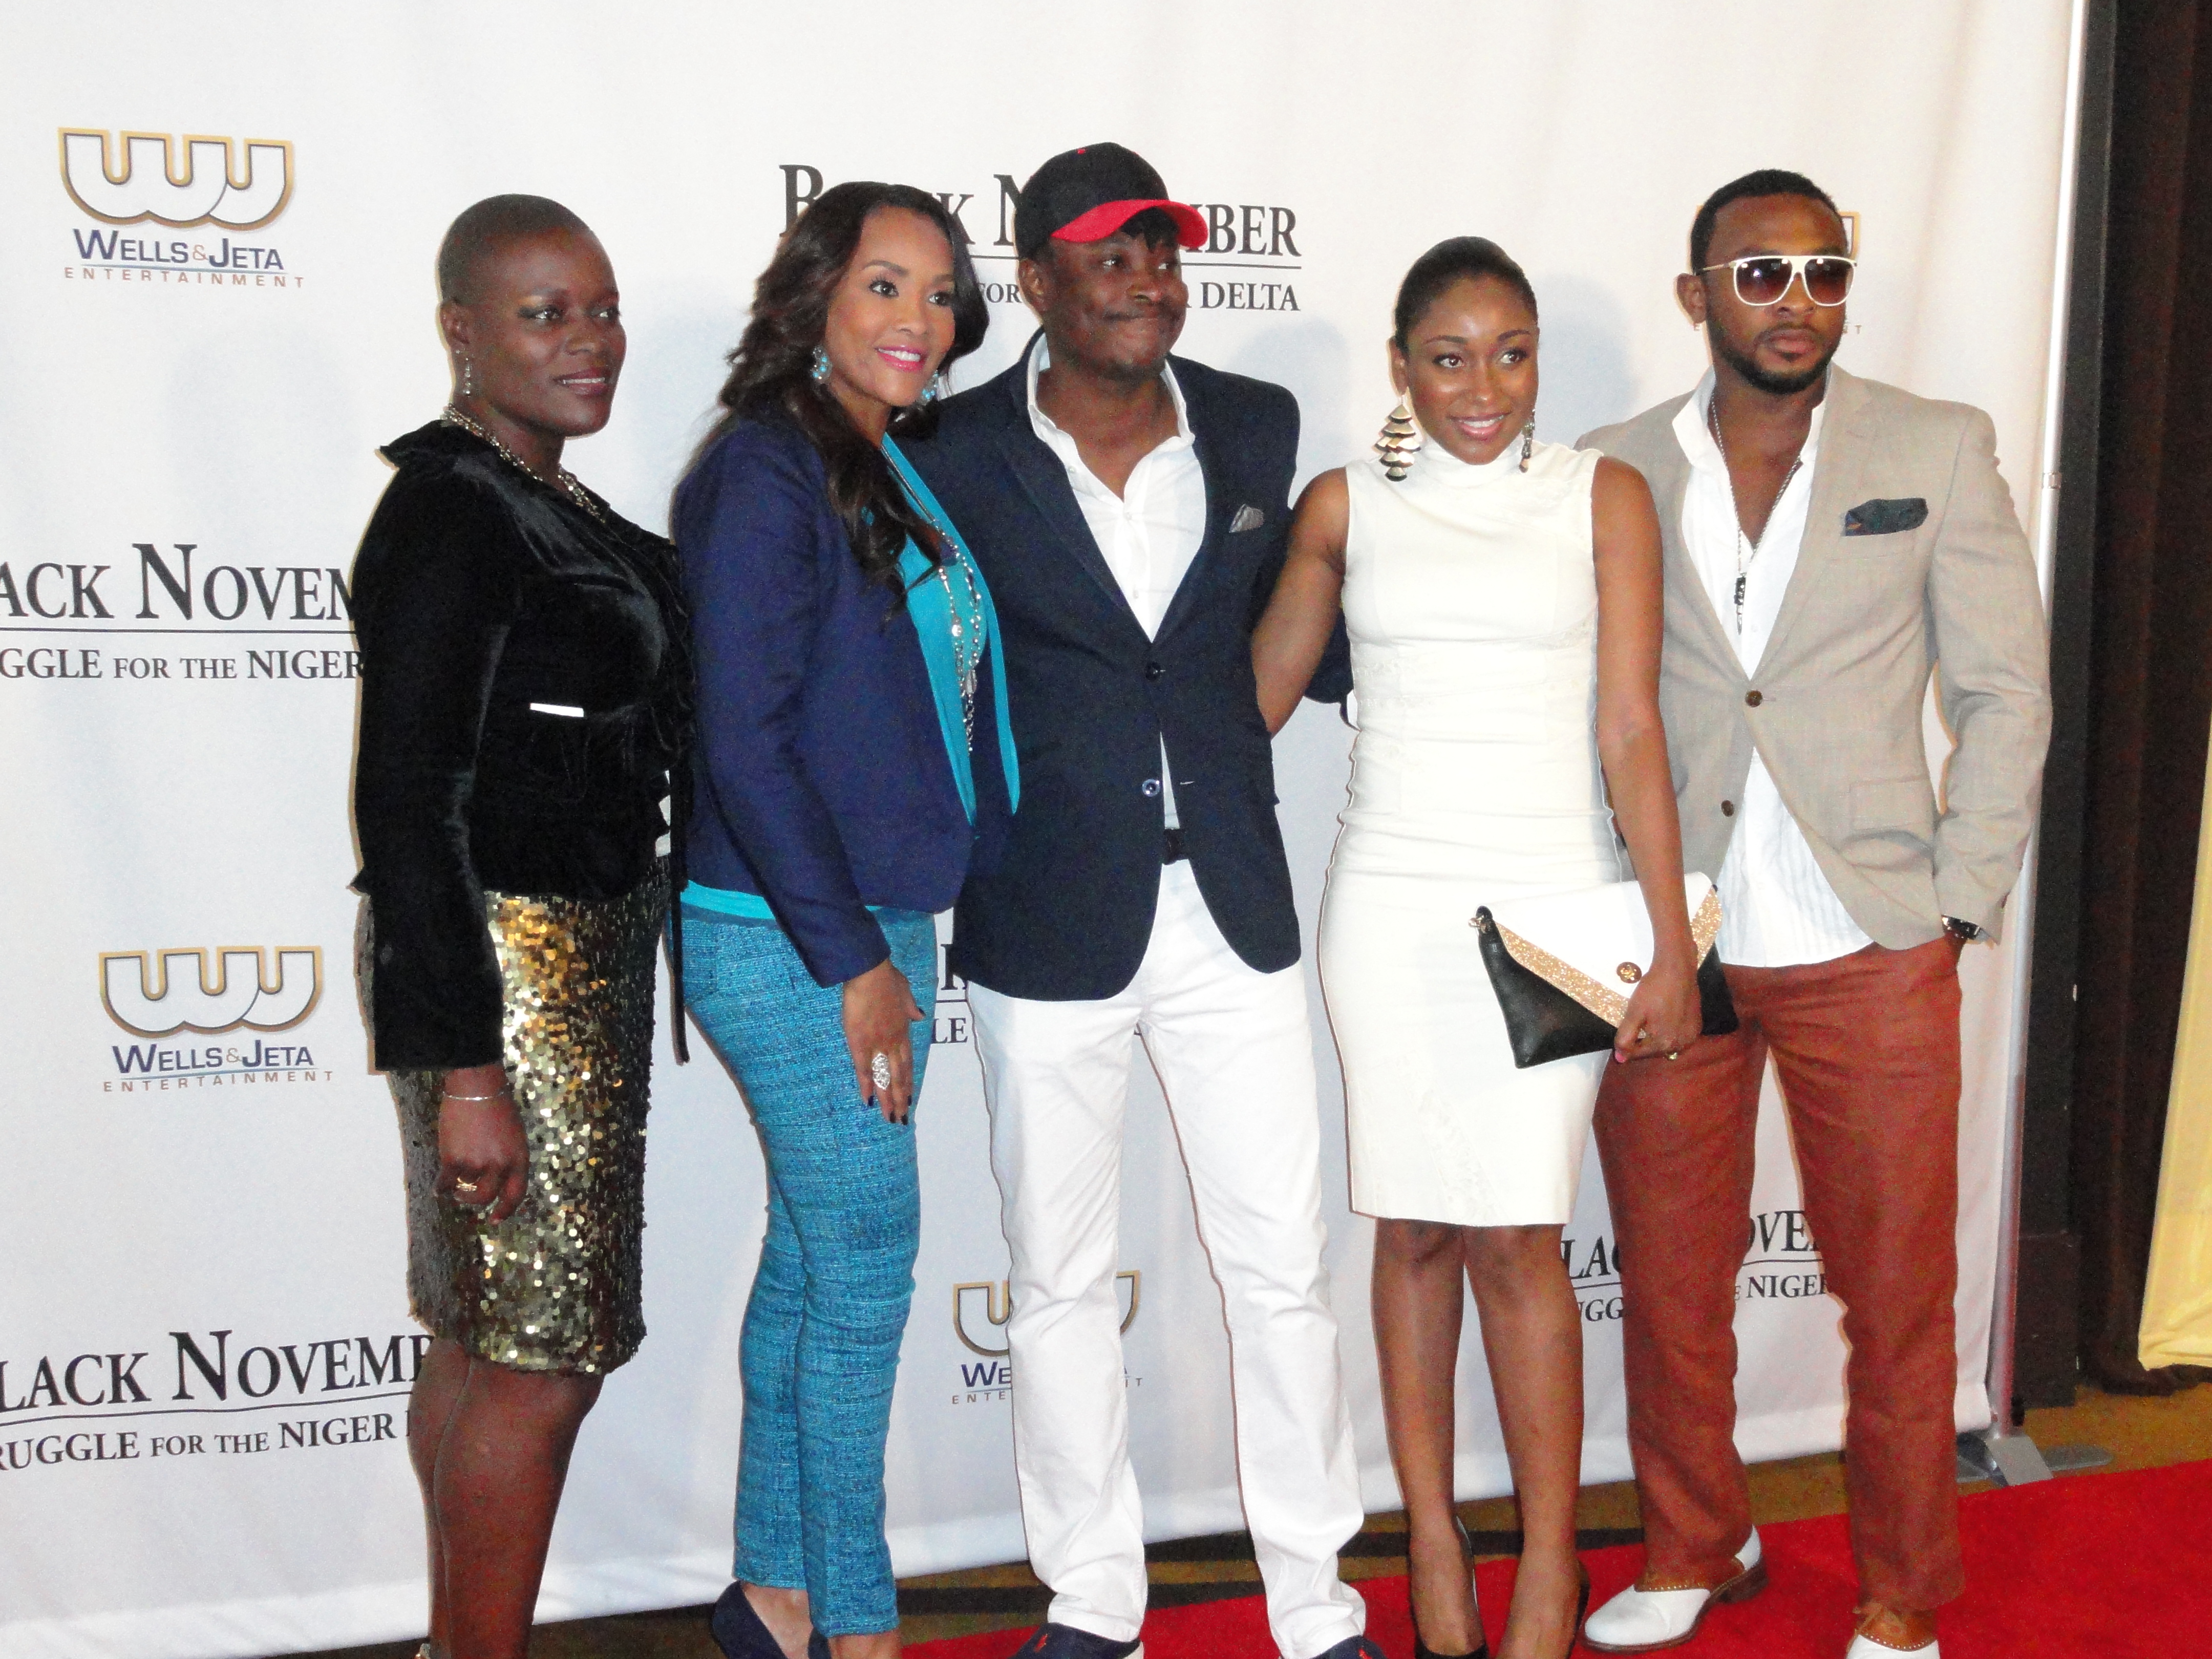 New Nollywood Film Brings Hollywood Action and Global Awareness